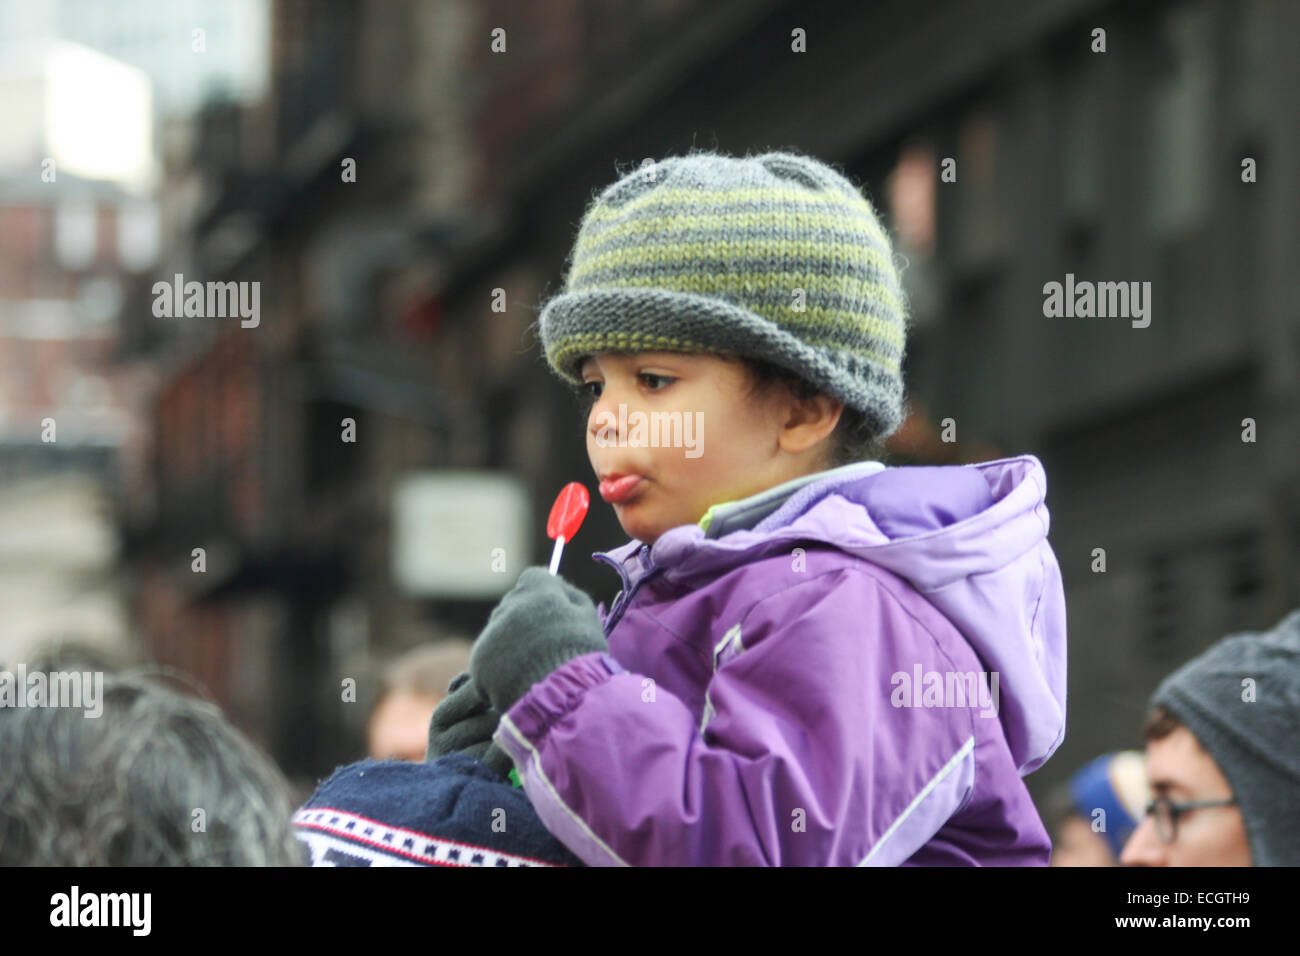 Boston, Massachusetts, USA. 13th December, 2014. A small child with a lollipop sits on an adult's shoulders during the Millions March rally in Boston, Massachusetts, USA.  The protest, like those in other cities throughout the United States on this day, is in response to recent grand jury verdicts not indicting the police officers who  killed unarmed black men Michael Brown and Eric Garner, and to the longstanding problems of racism and police brutality. Credit:  Susan Pease/Alamy Live News Stock Photo